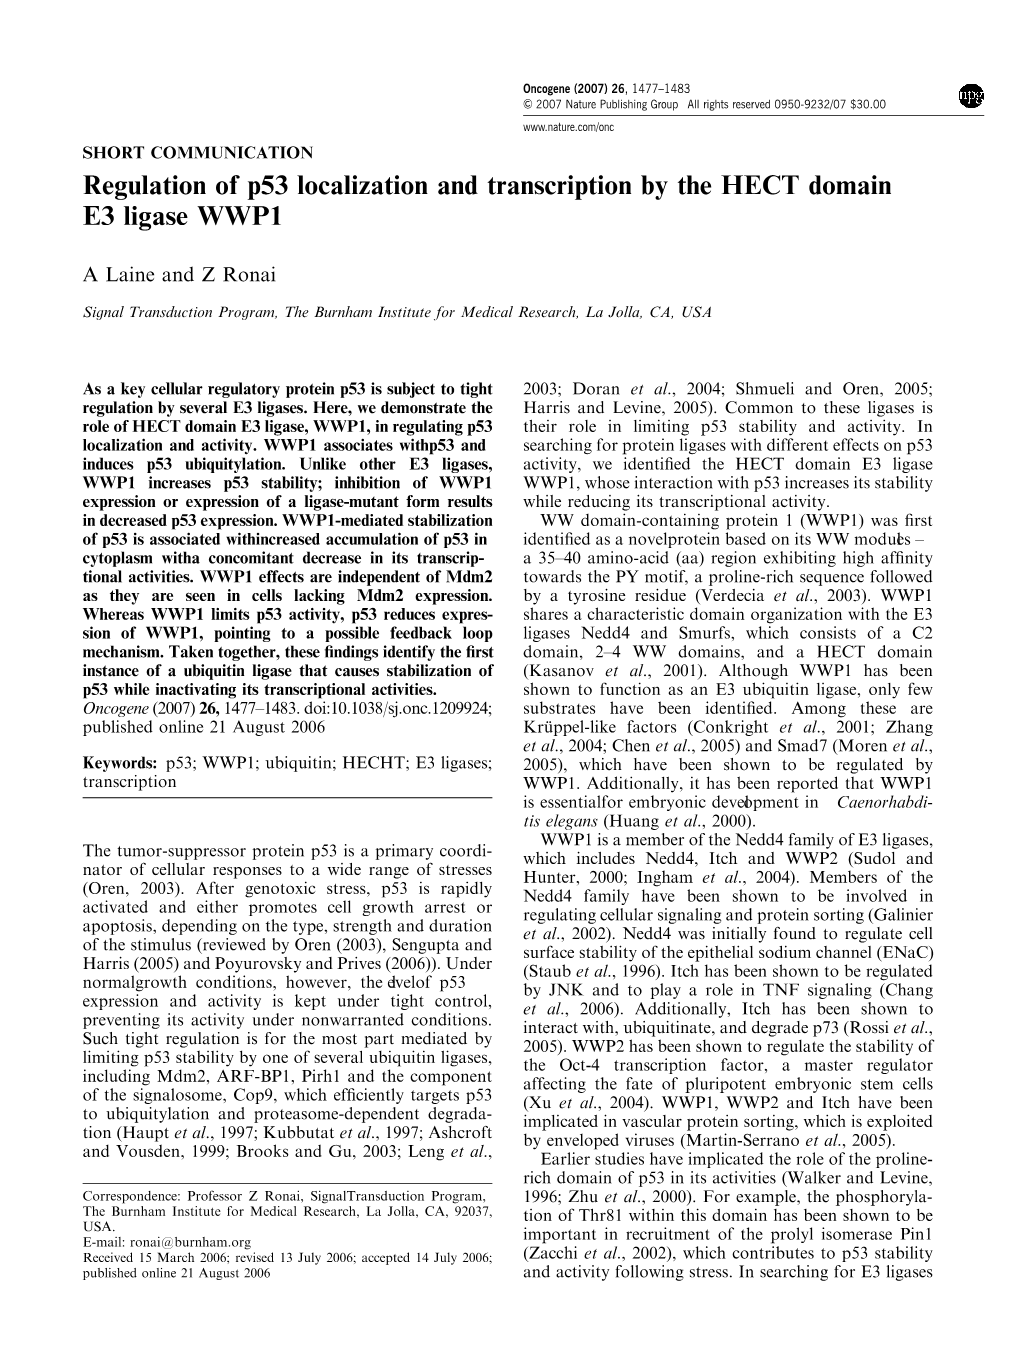 Regulation of P53 Localization and Transcription by the HECT Domain E3 Ligase WWP1